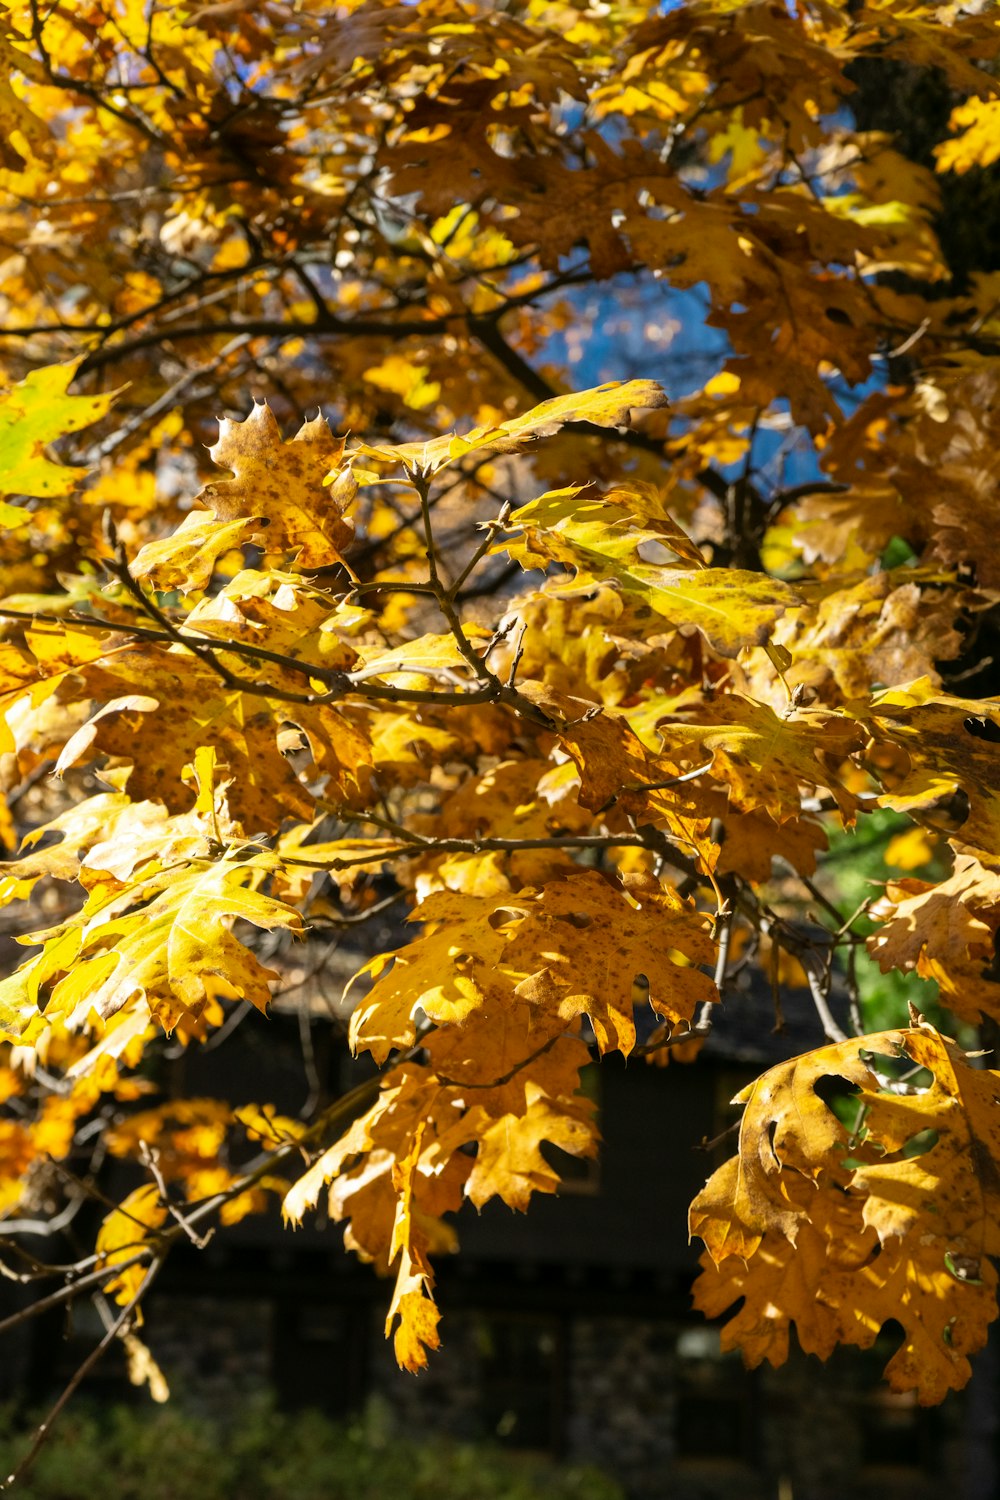 a tree with yellow leaves in front of a house